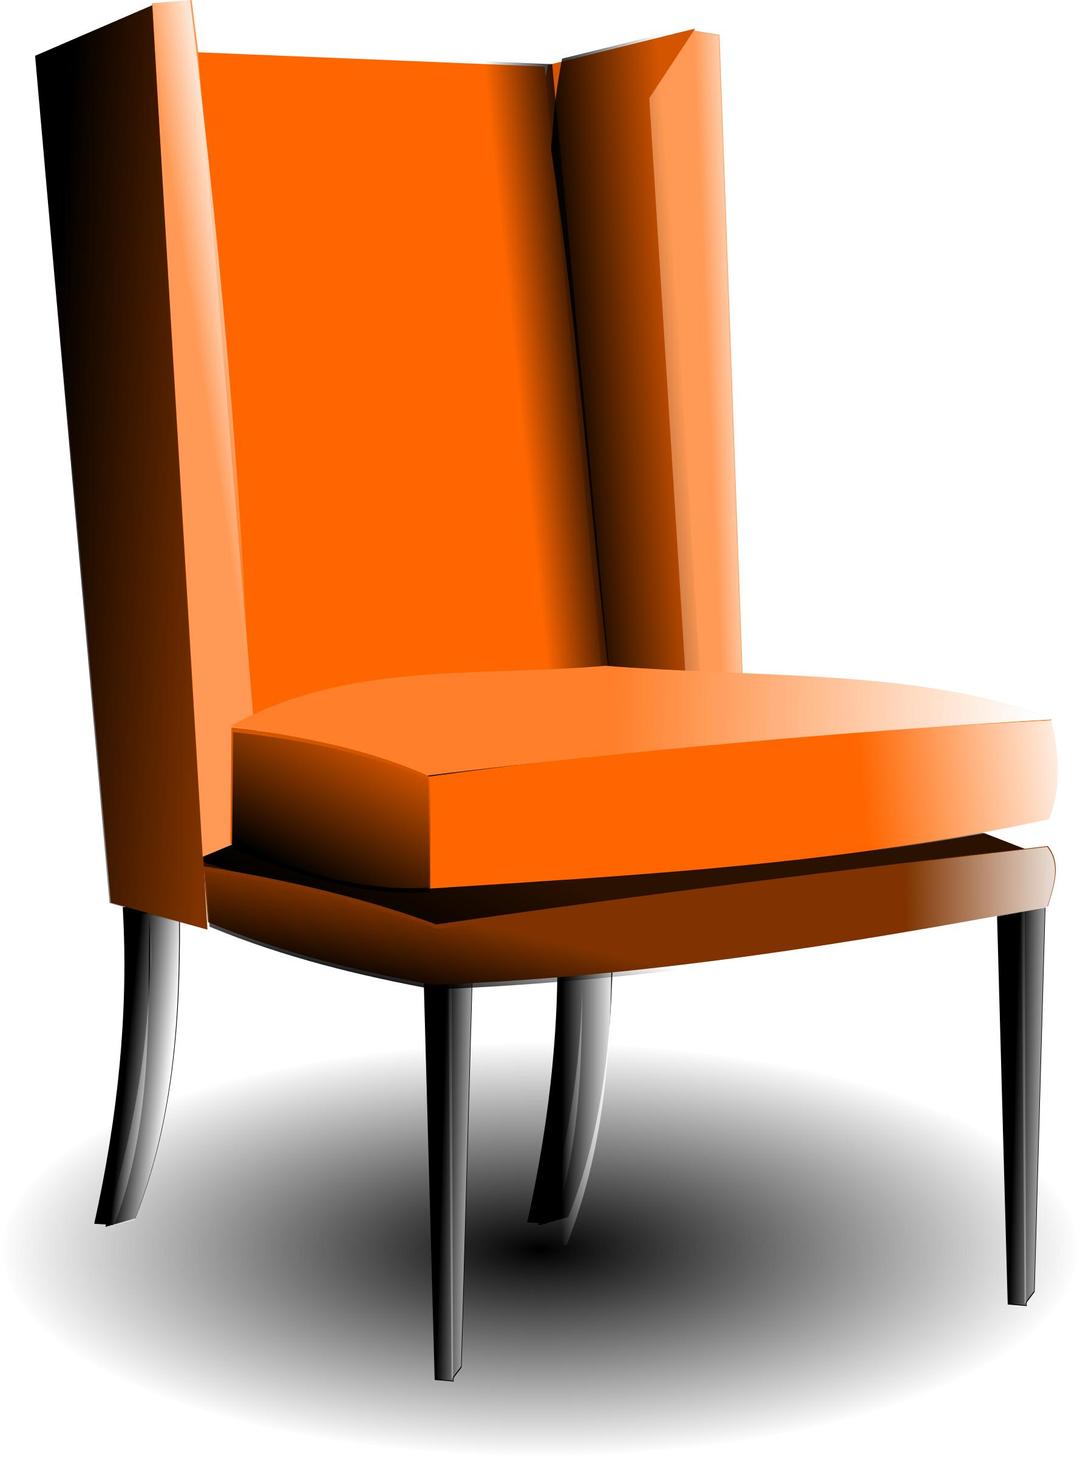 old-fashioned armchair png transparent